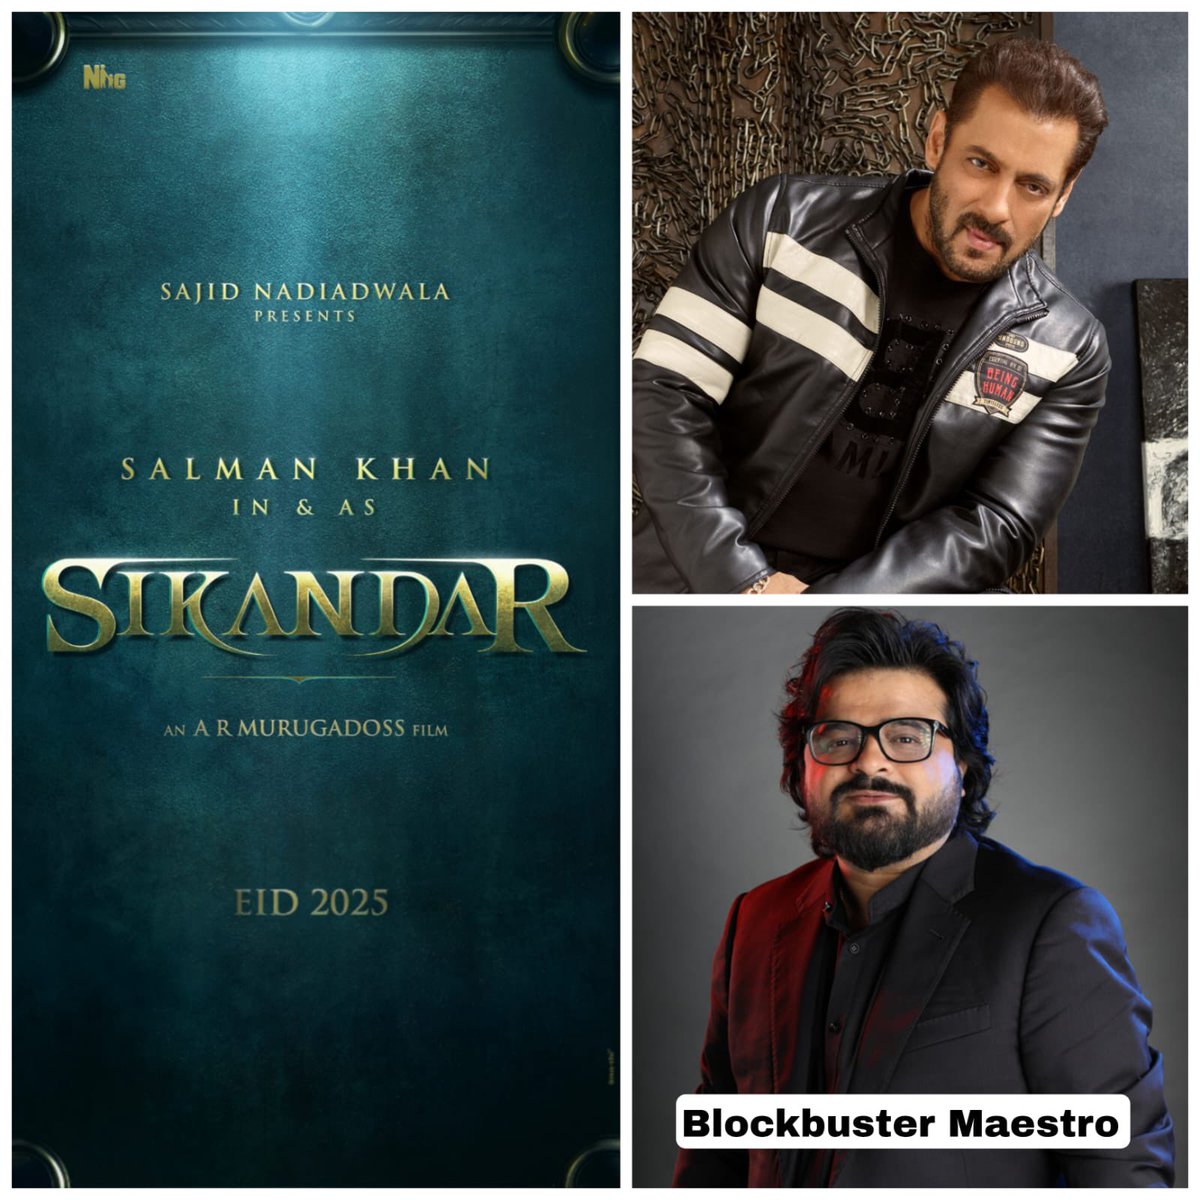 #SIKANDAR musical chords will be designed by #PritamChakraborty ! 

After the titans like #SalmanKhan, #SajidNadiadwala, and @ARMurugados, this one is yet another big name joining the mega project 💫

Get ready for SIKANDAR in cinemas near you on EID 2025!

@NGEMovies…